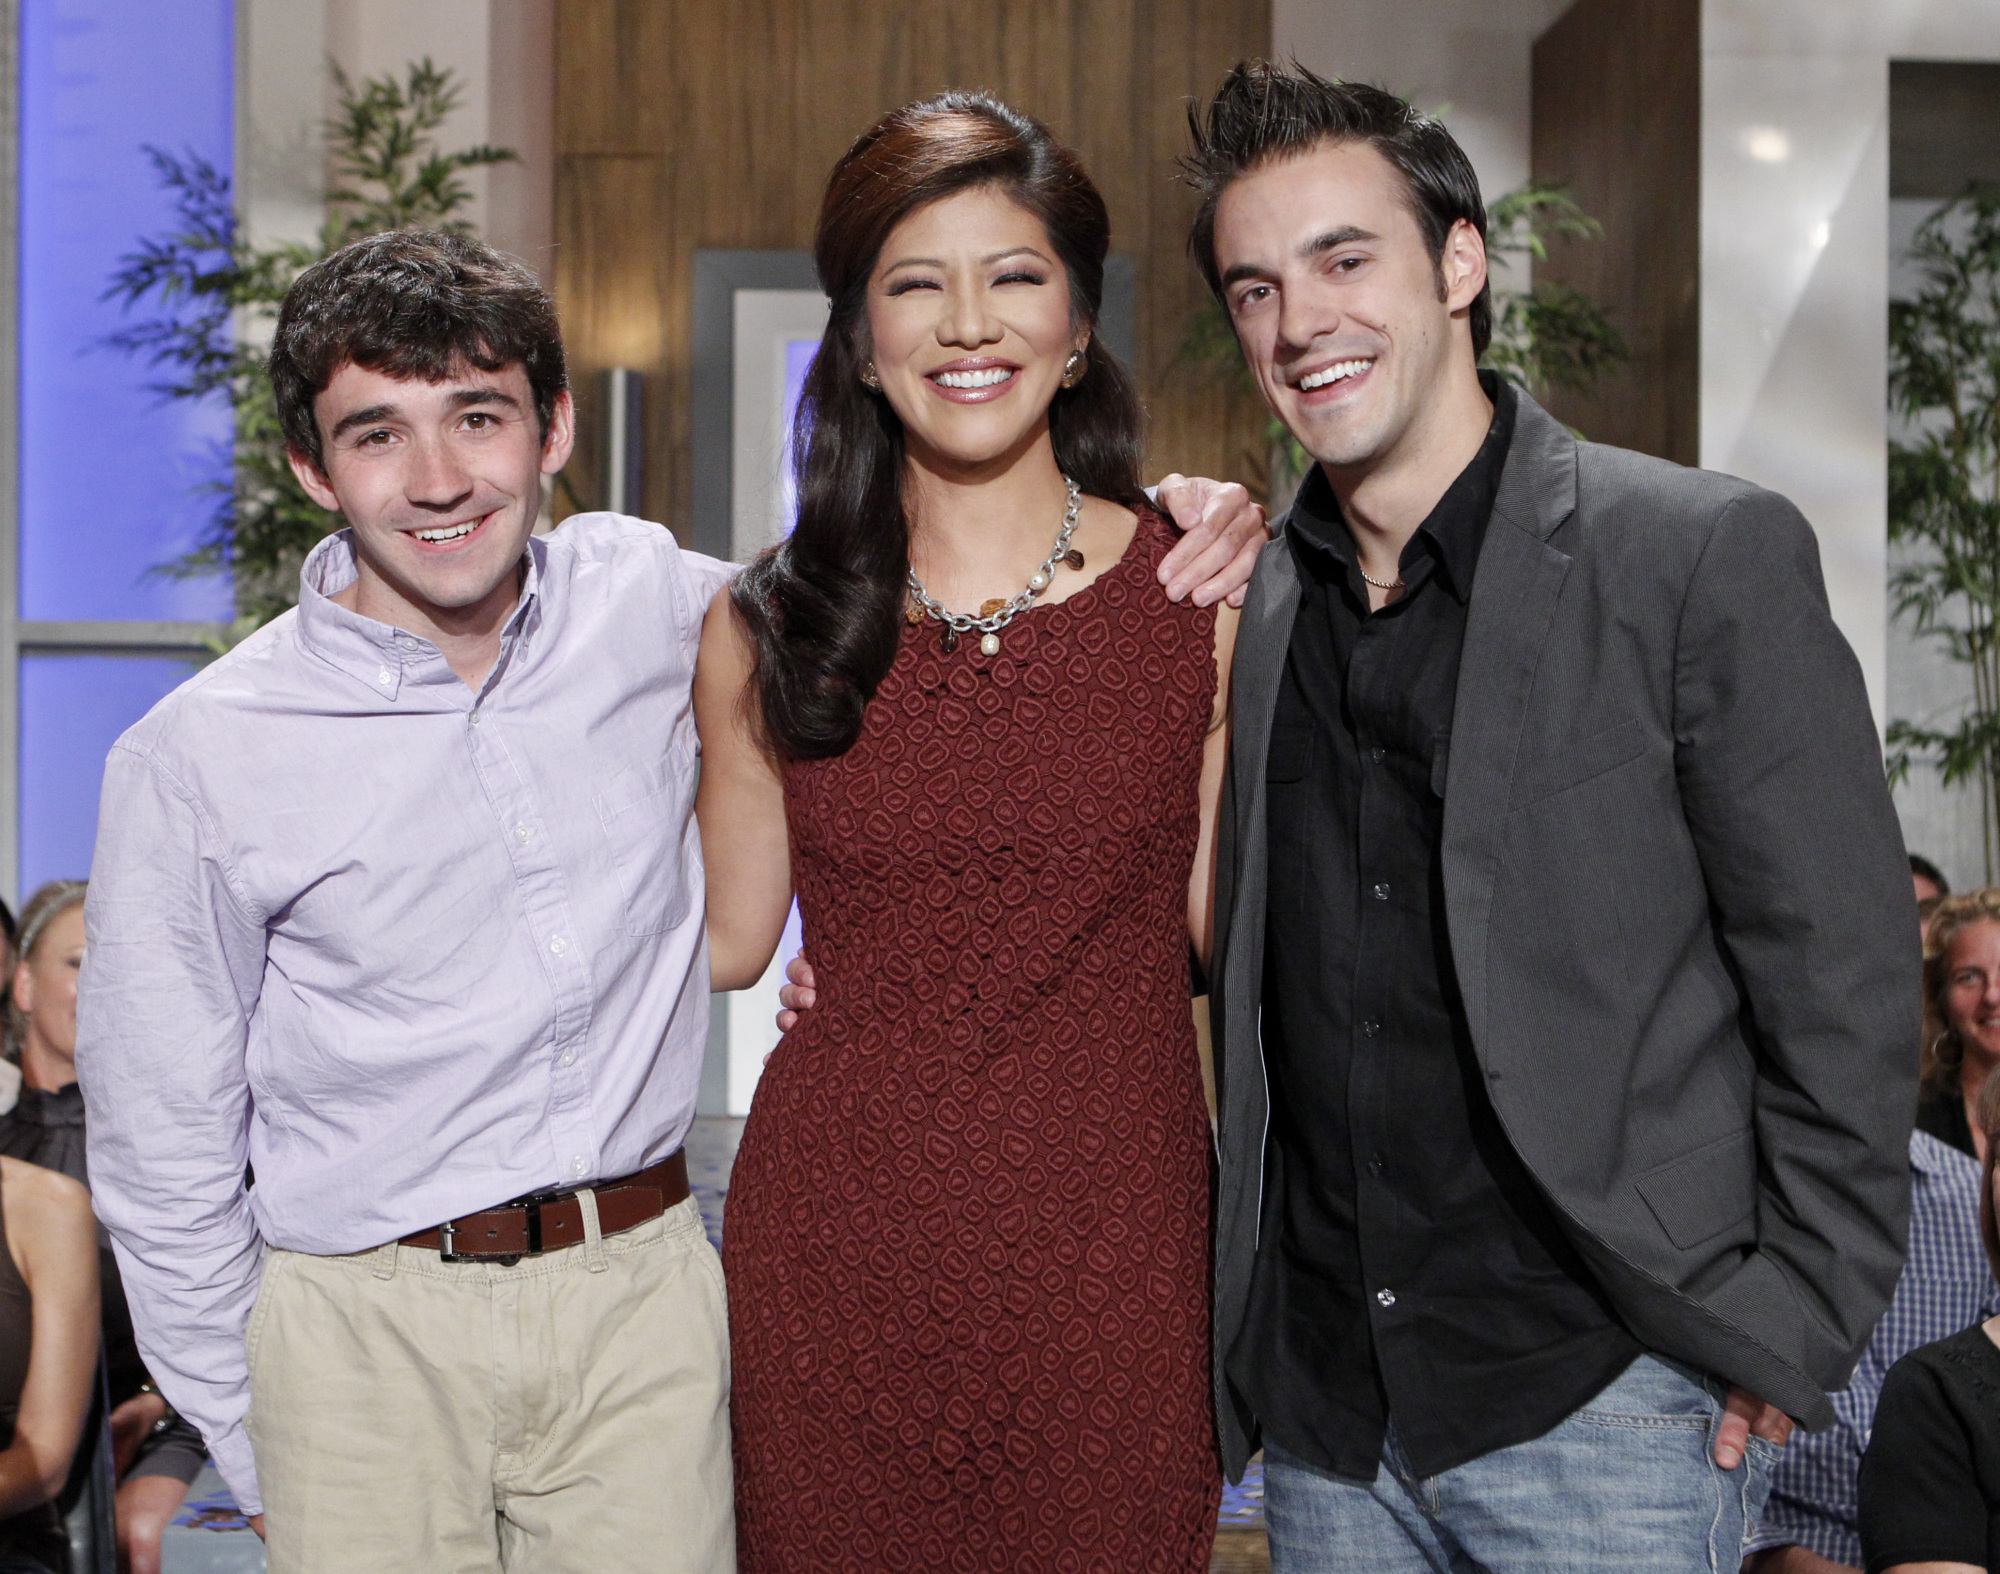 Julie Chen poses with Winner Ian and Runner-Up Dan